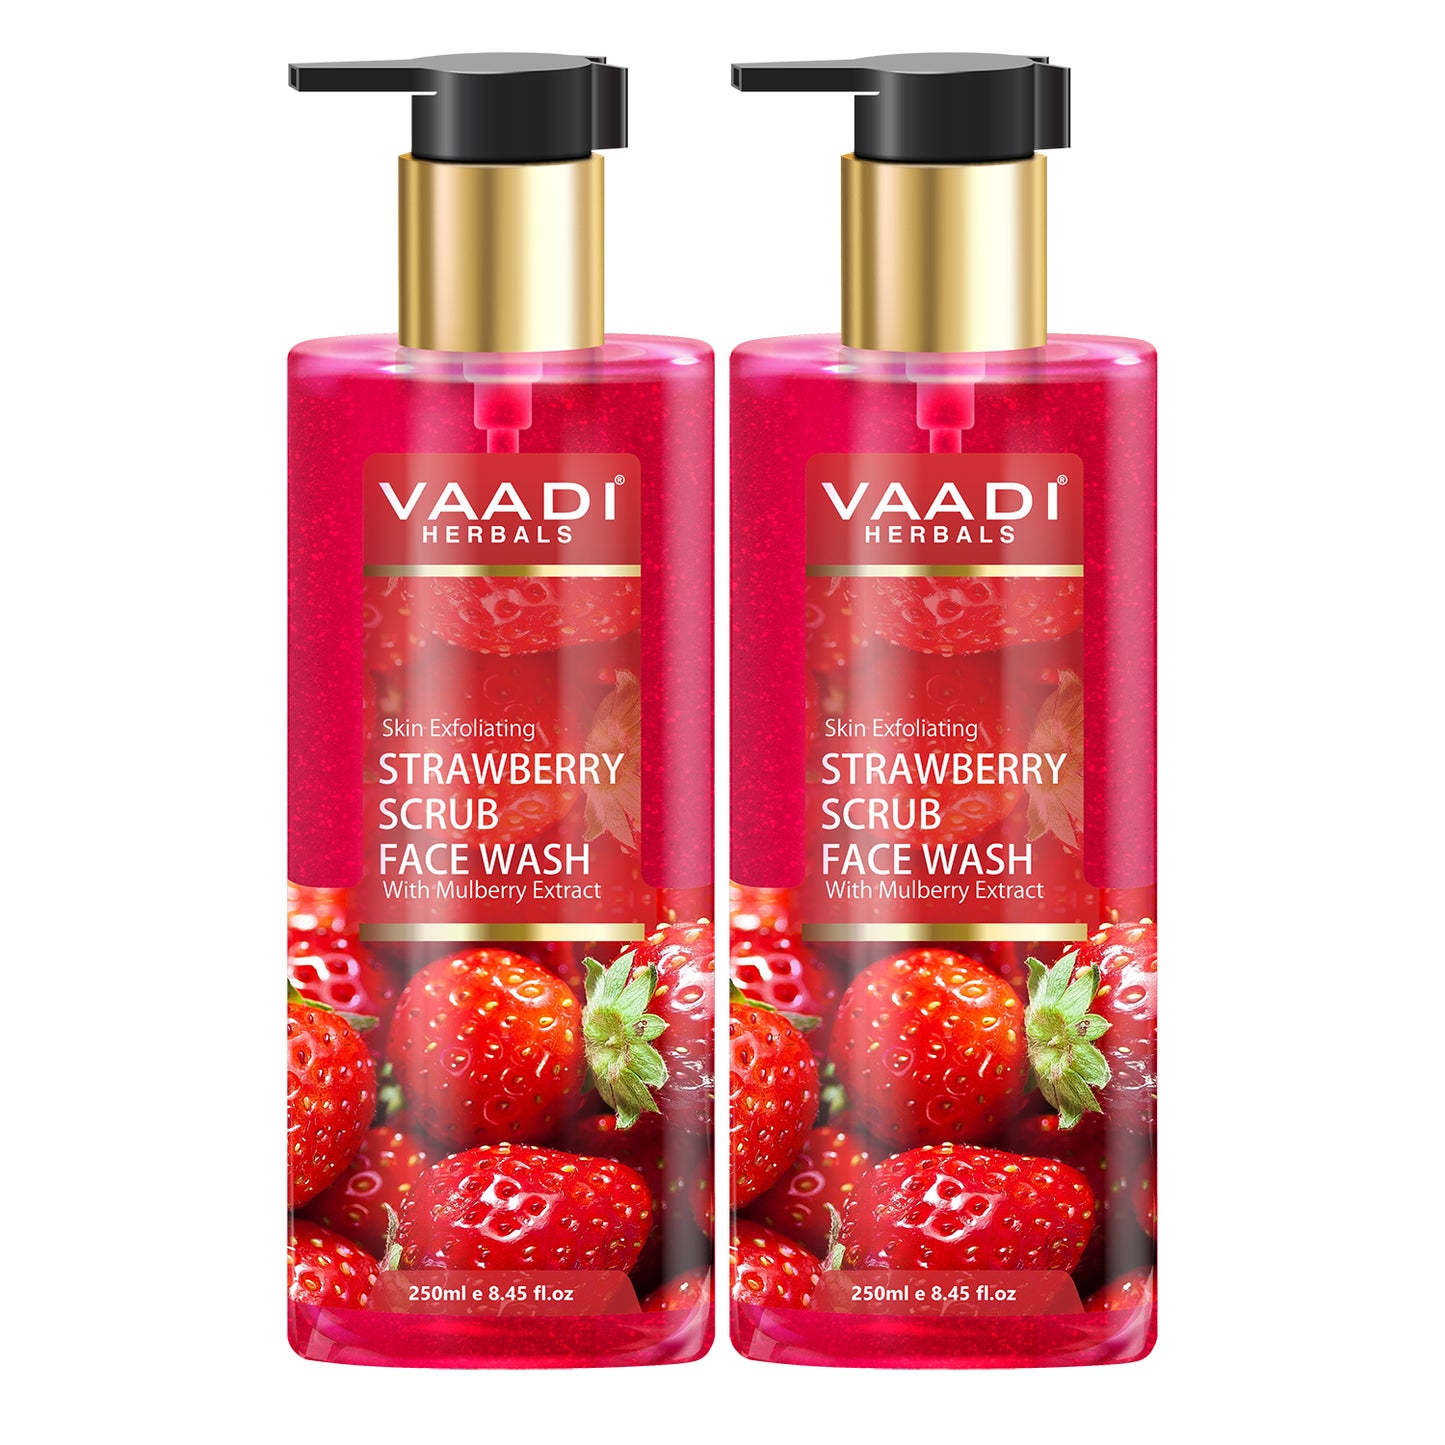 Strawberry Scrub Face Wash With Mulberry Extract ( 2 x 250 ml/8.45 fl oz)